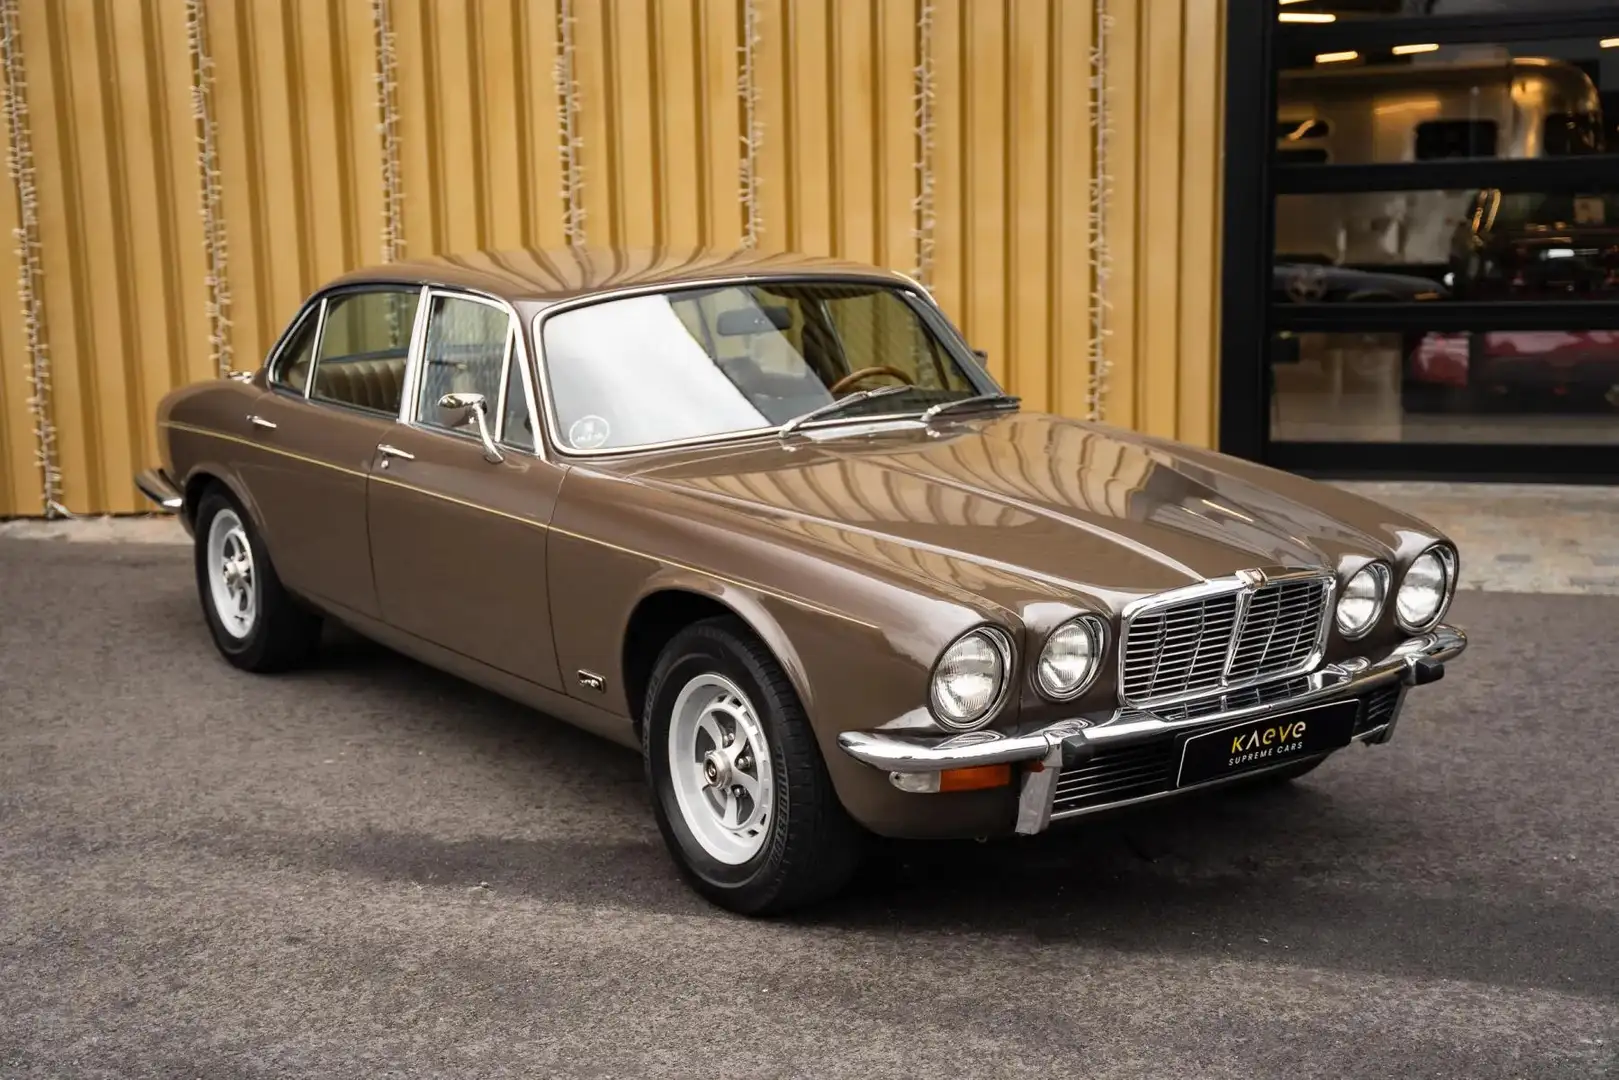 Jaguar XJ6 4.2 ltr. Manual gearbox with Overdrive Maro - 2